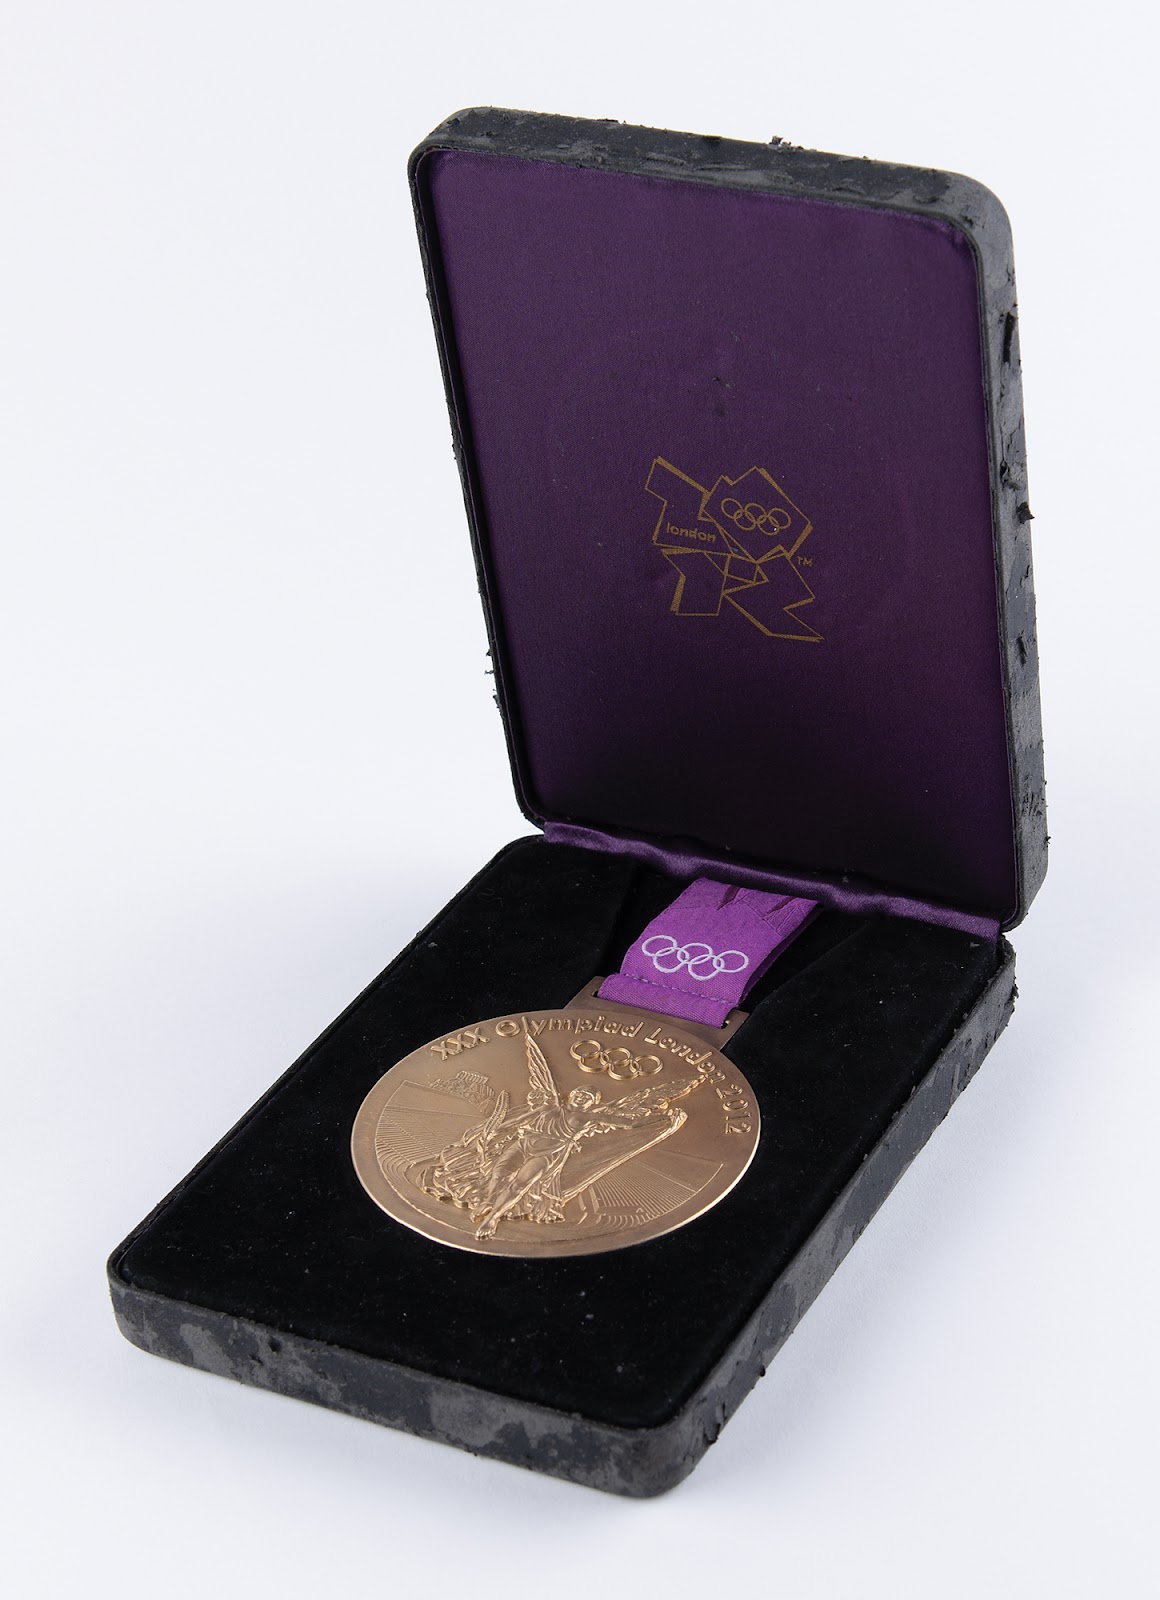 Gold winner’s medal from the 2012 London Games, awarded to Roniel Iglesias for lightweight boxing.